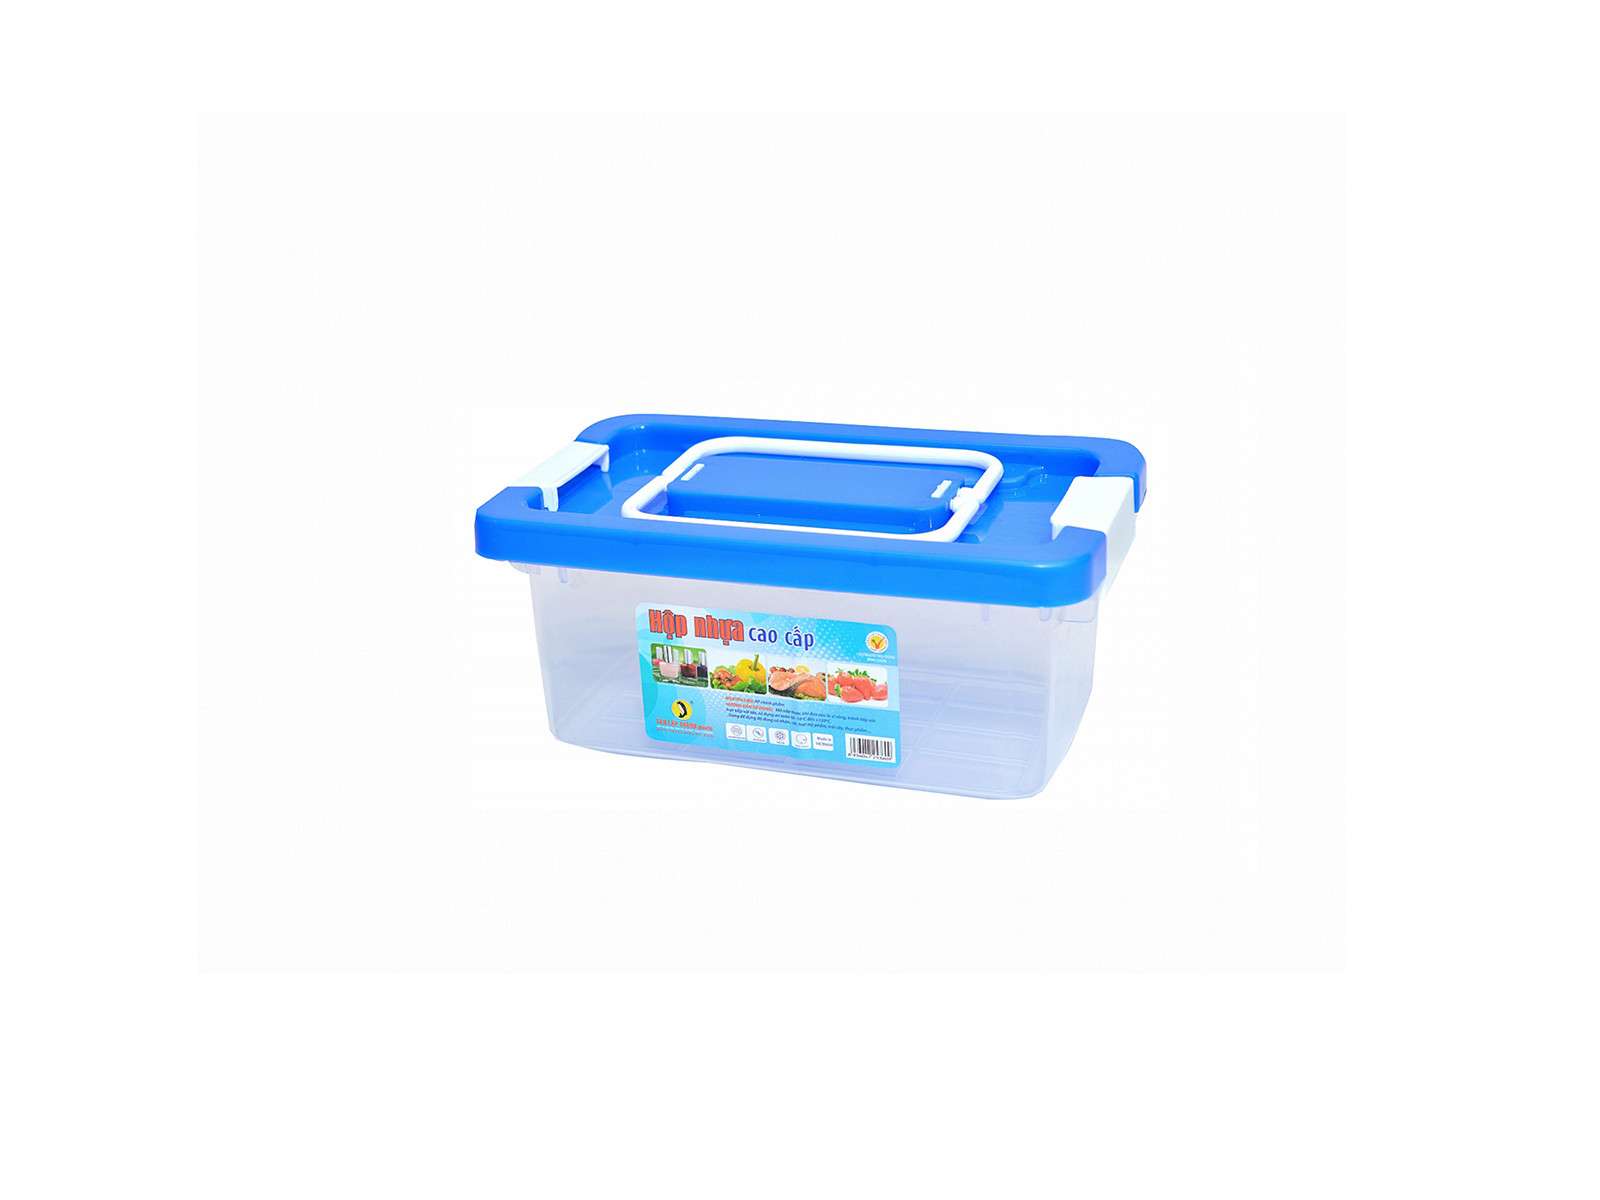 Food container with 2 handles - Medium